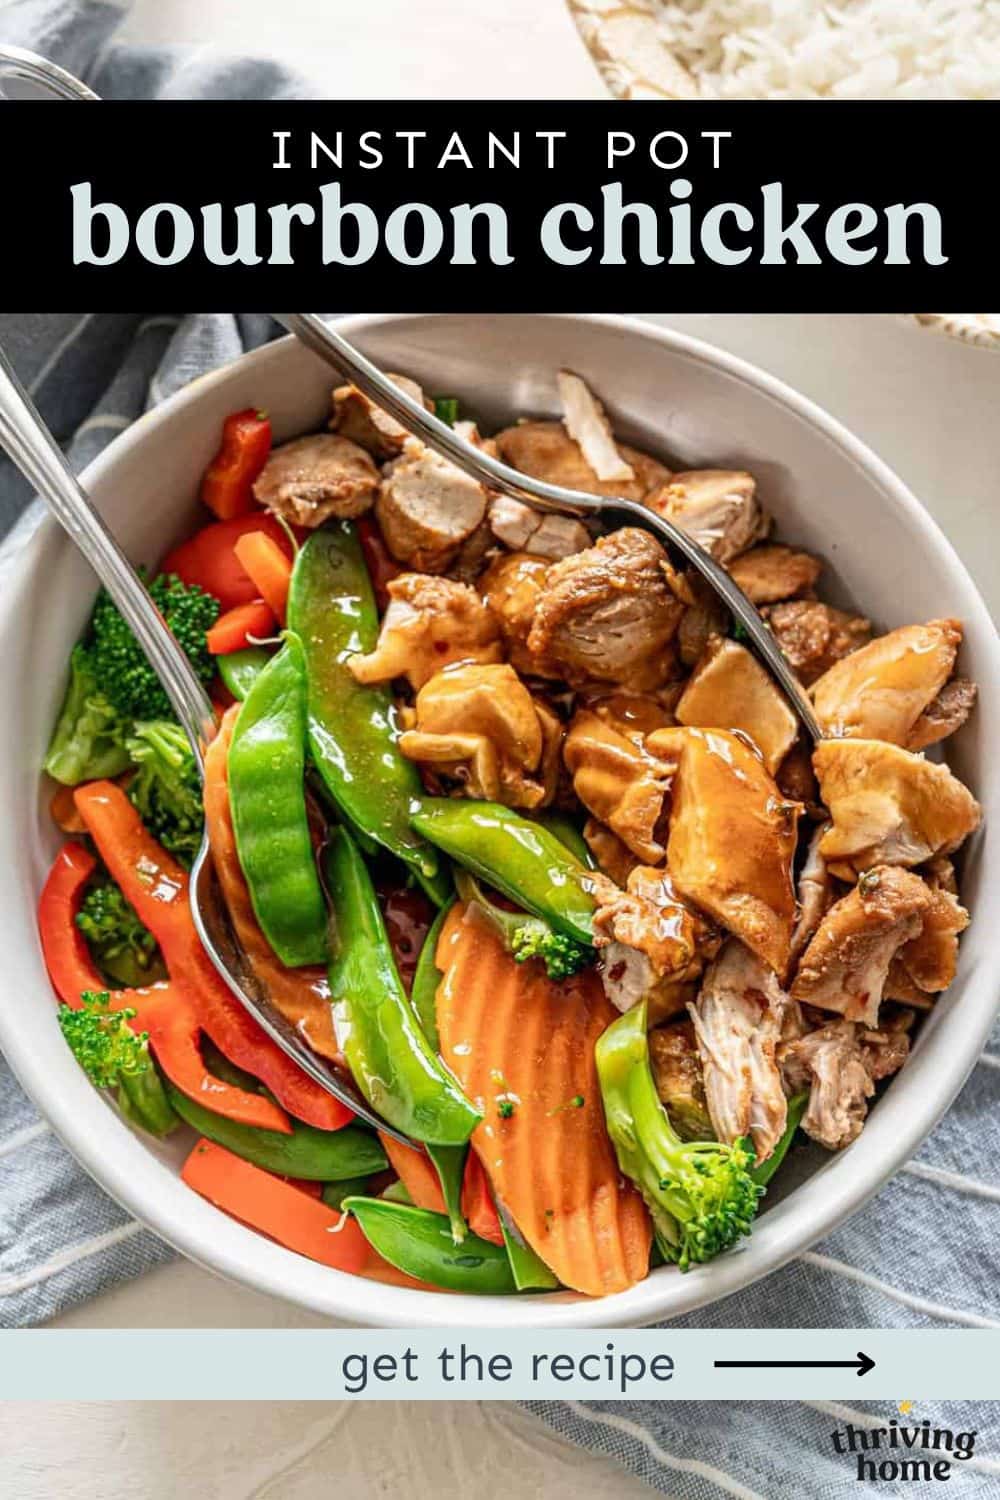 bowl of chicken and stir fry veggies with bourbon sauce top.